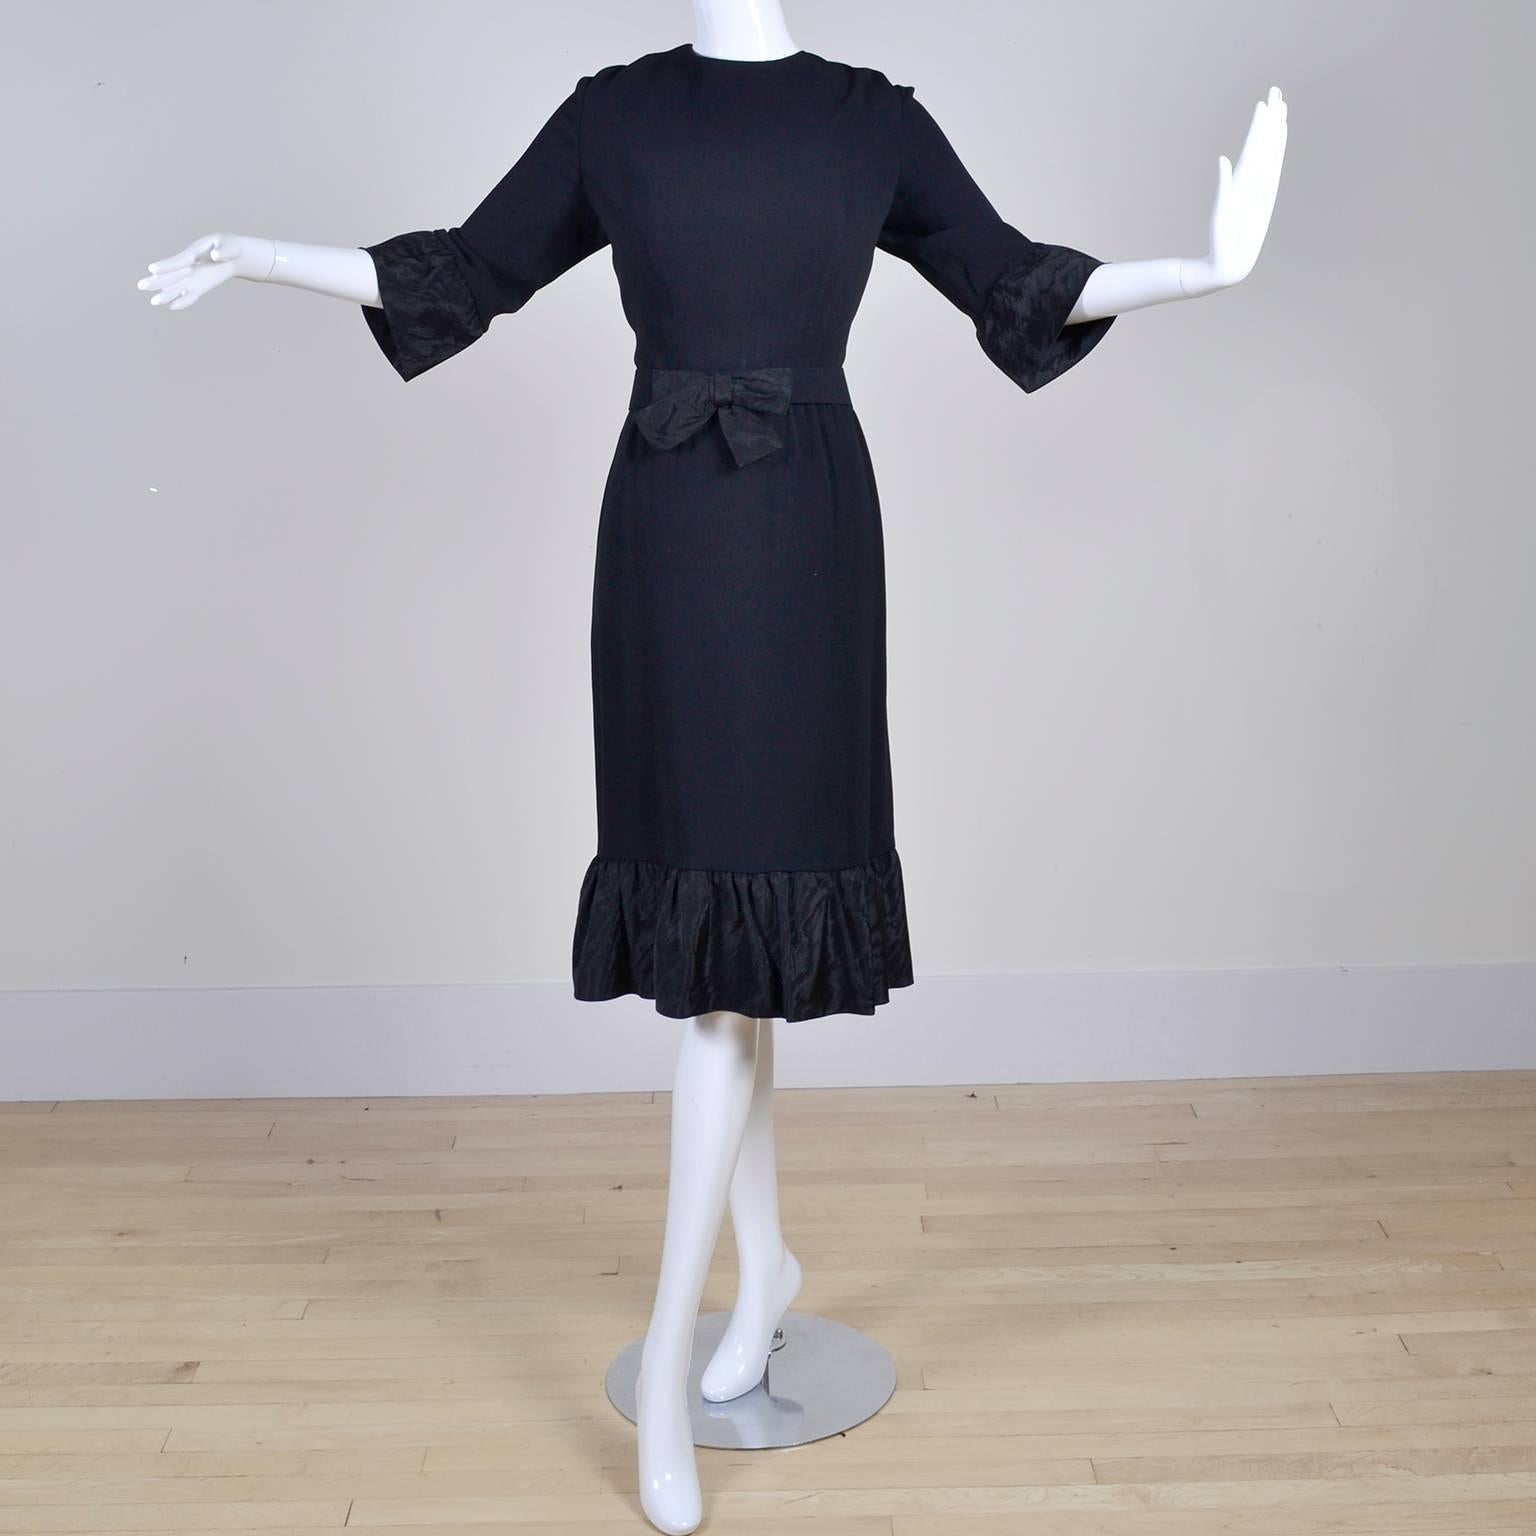 This vintage dress from Pattullo-Jo Copeland is a fine wool crepe with fabulous taffeta ruffles at the cuffs and the hemline. This otherwise simple black dress has details that give it so much style; always difficult to show with photography when